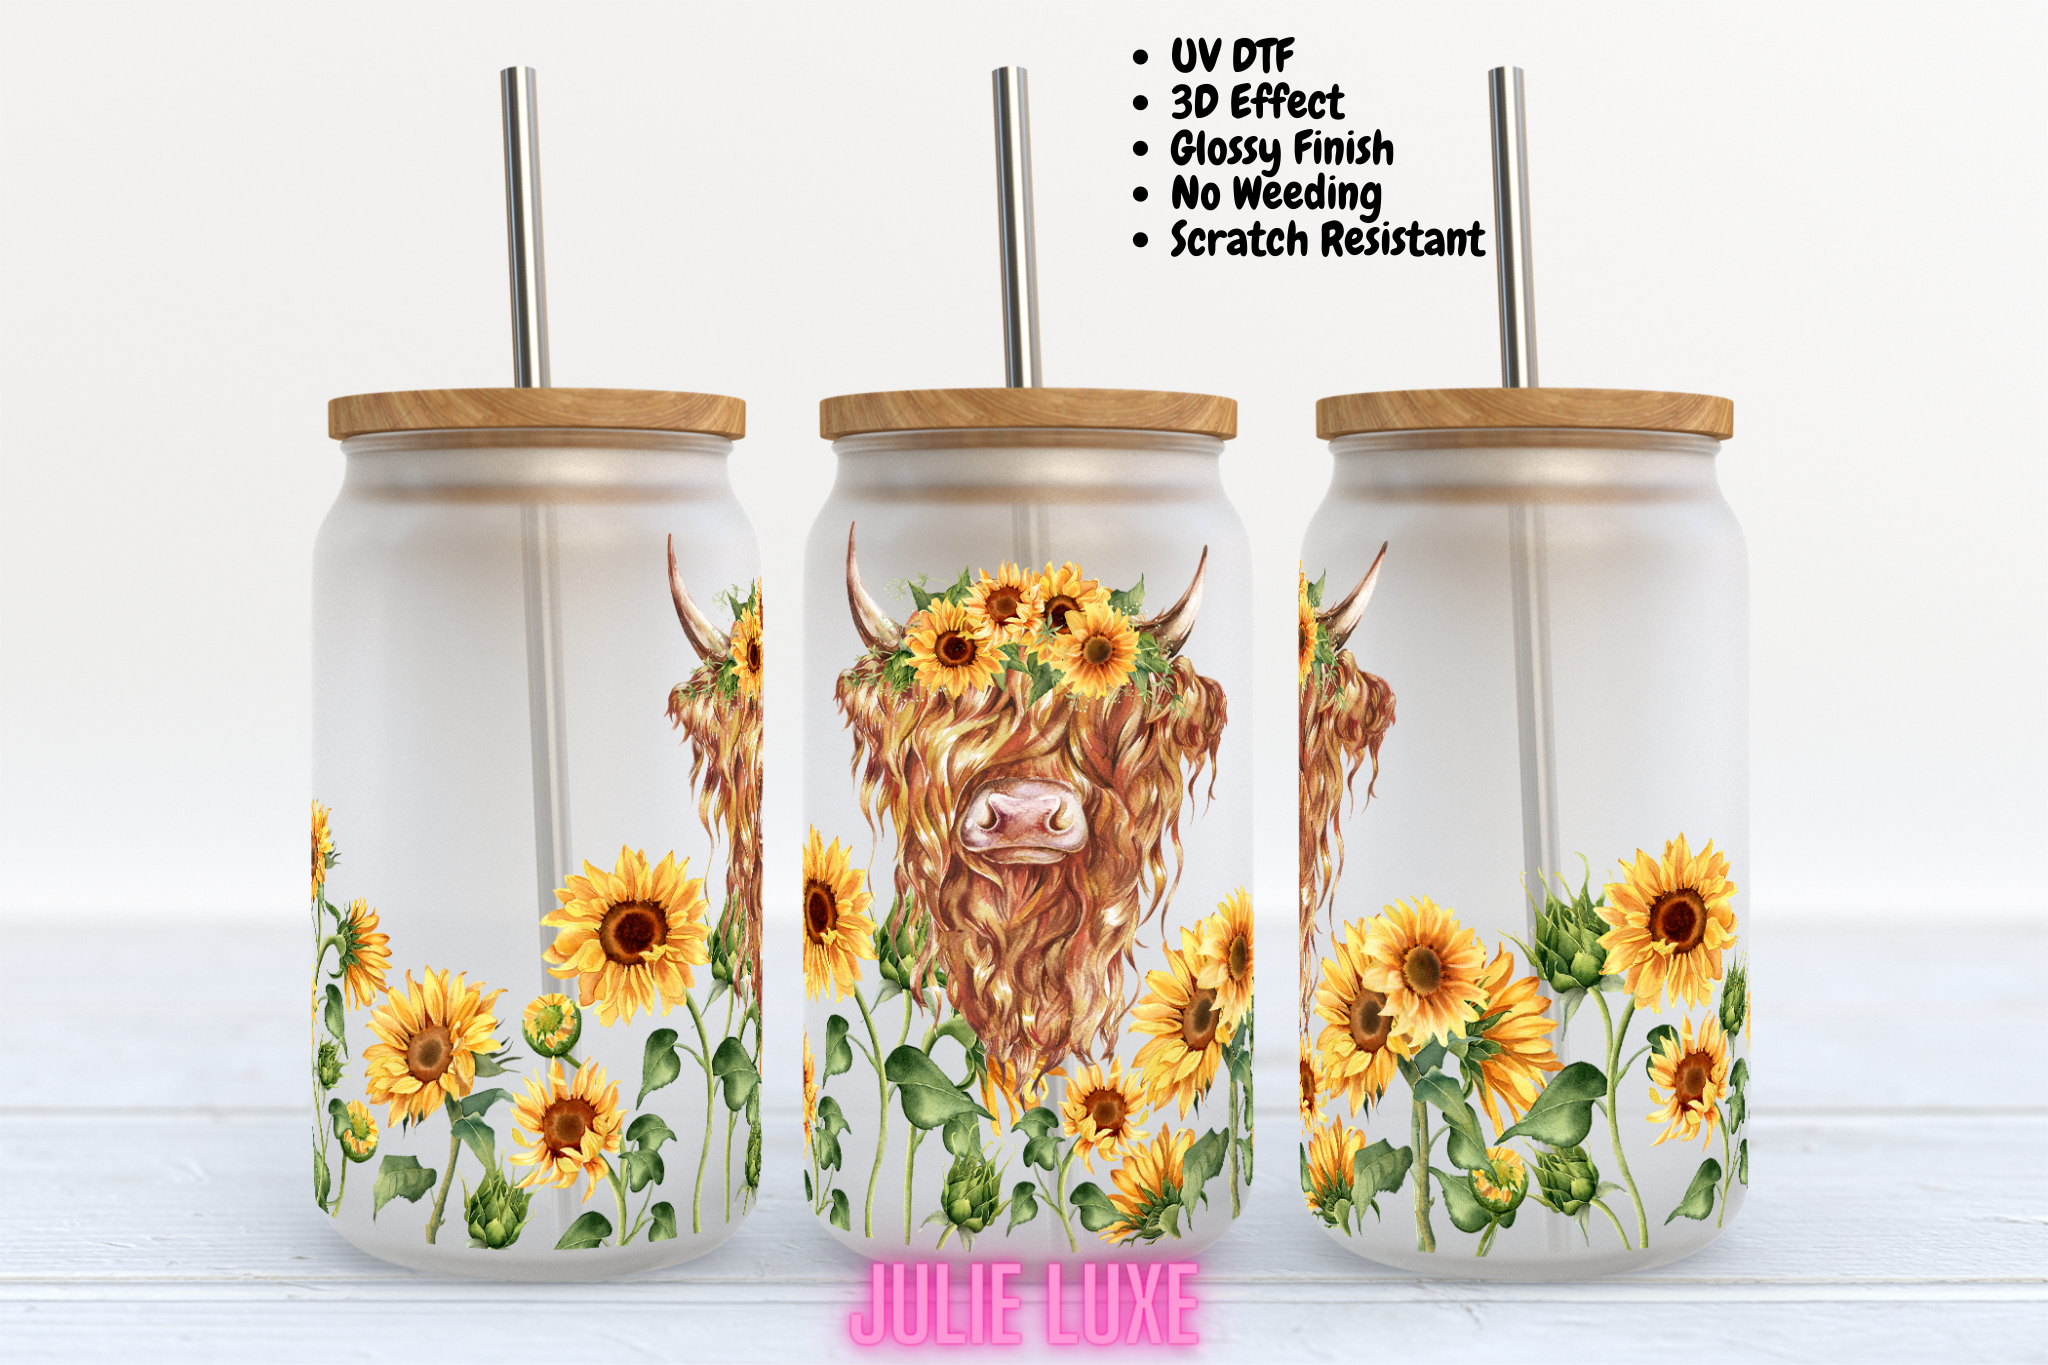  Rngmsi UV DTF Wraps - 8 Sheets Plant UV DTF Cup Wrap Transfer  for Glass Waterproof Monstera Leaves Uvdtf Cup Wraps Daisy UV DTF Cup Wraps  for 16 oz Glass Cups